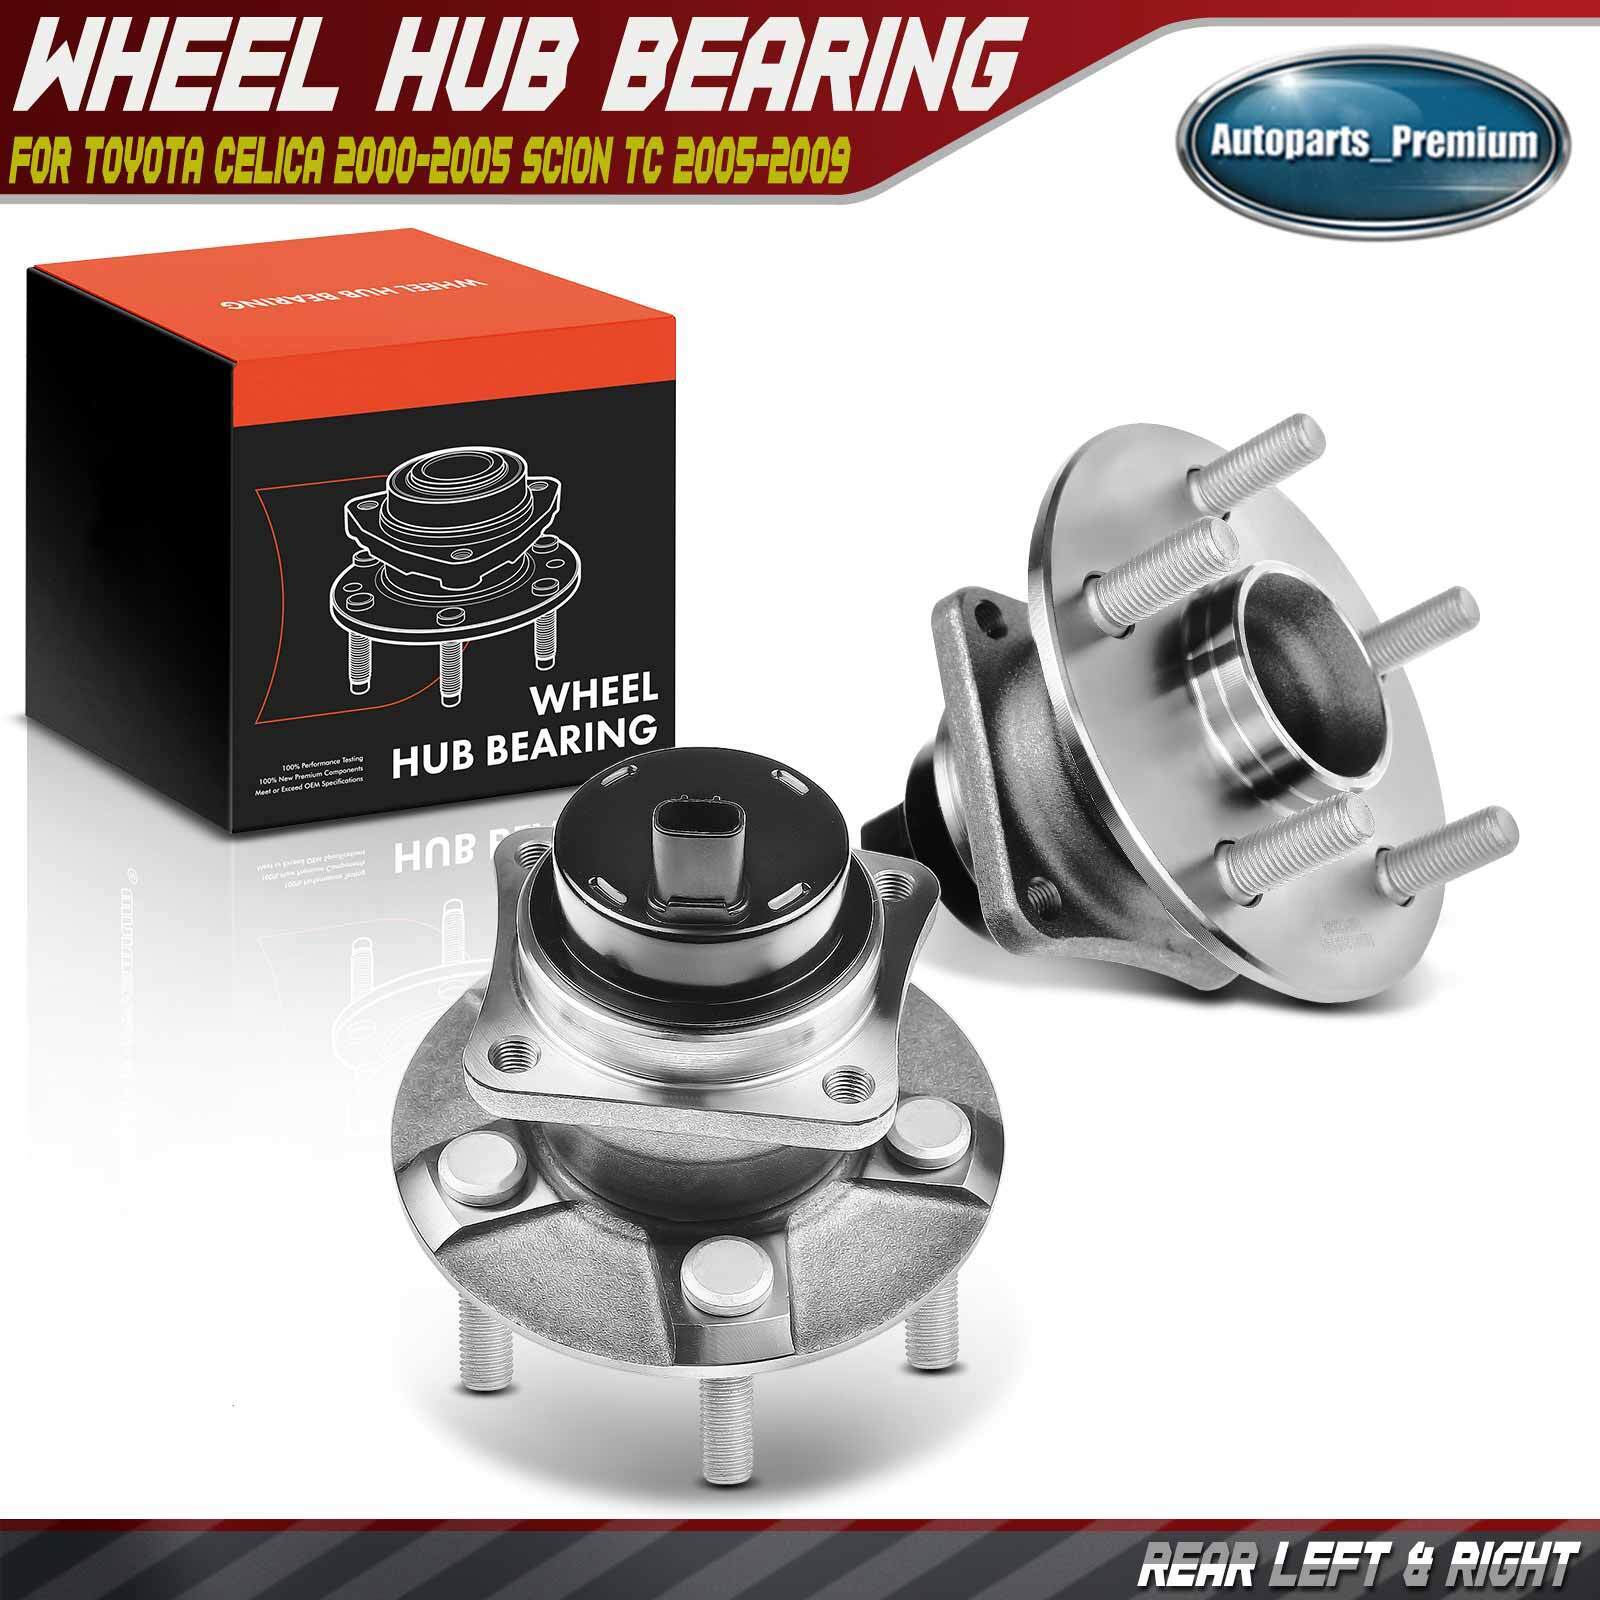 Rear LH & RH Wheel Hub Bearing Assembly with ABS for Toyota Celica Scion tC FWD